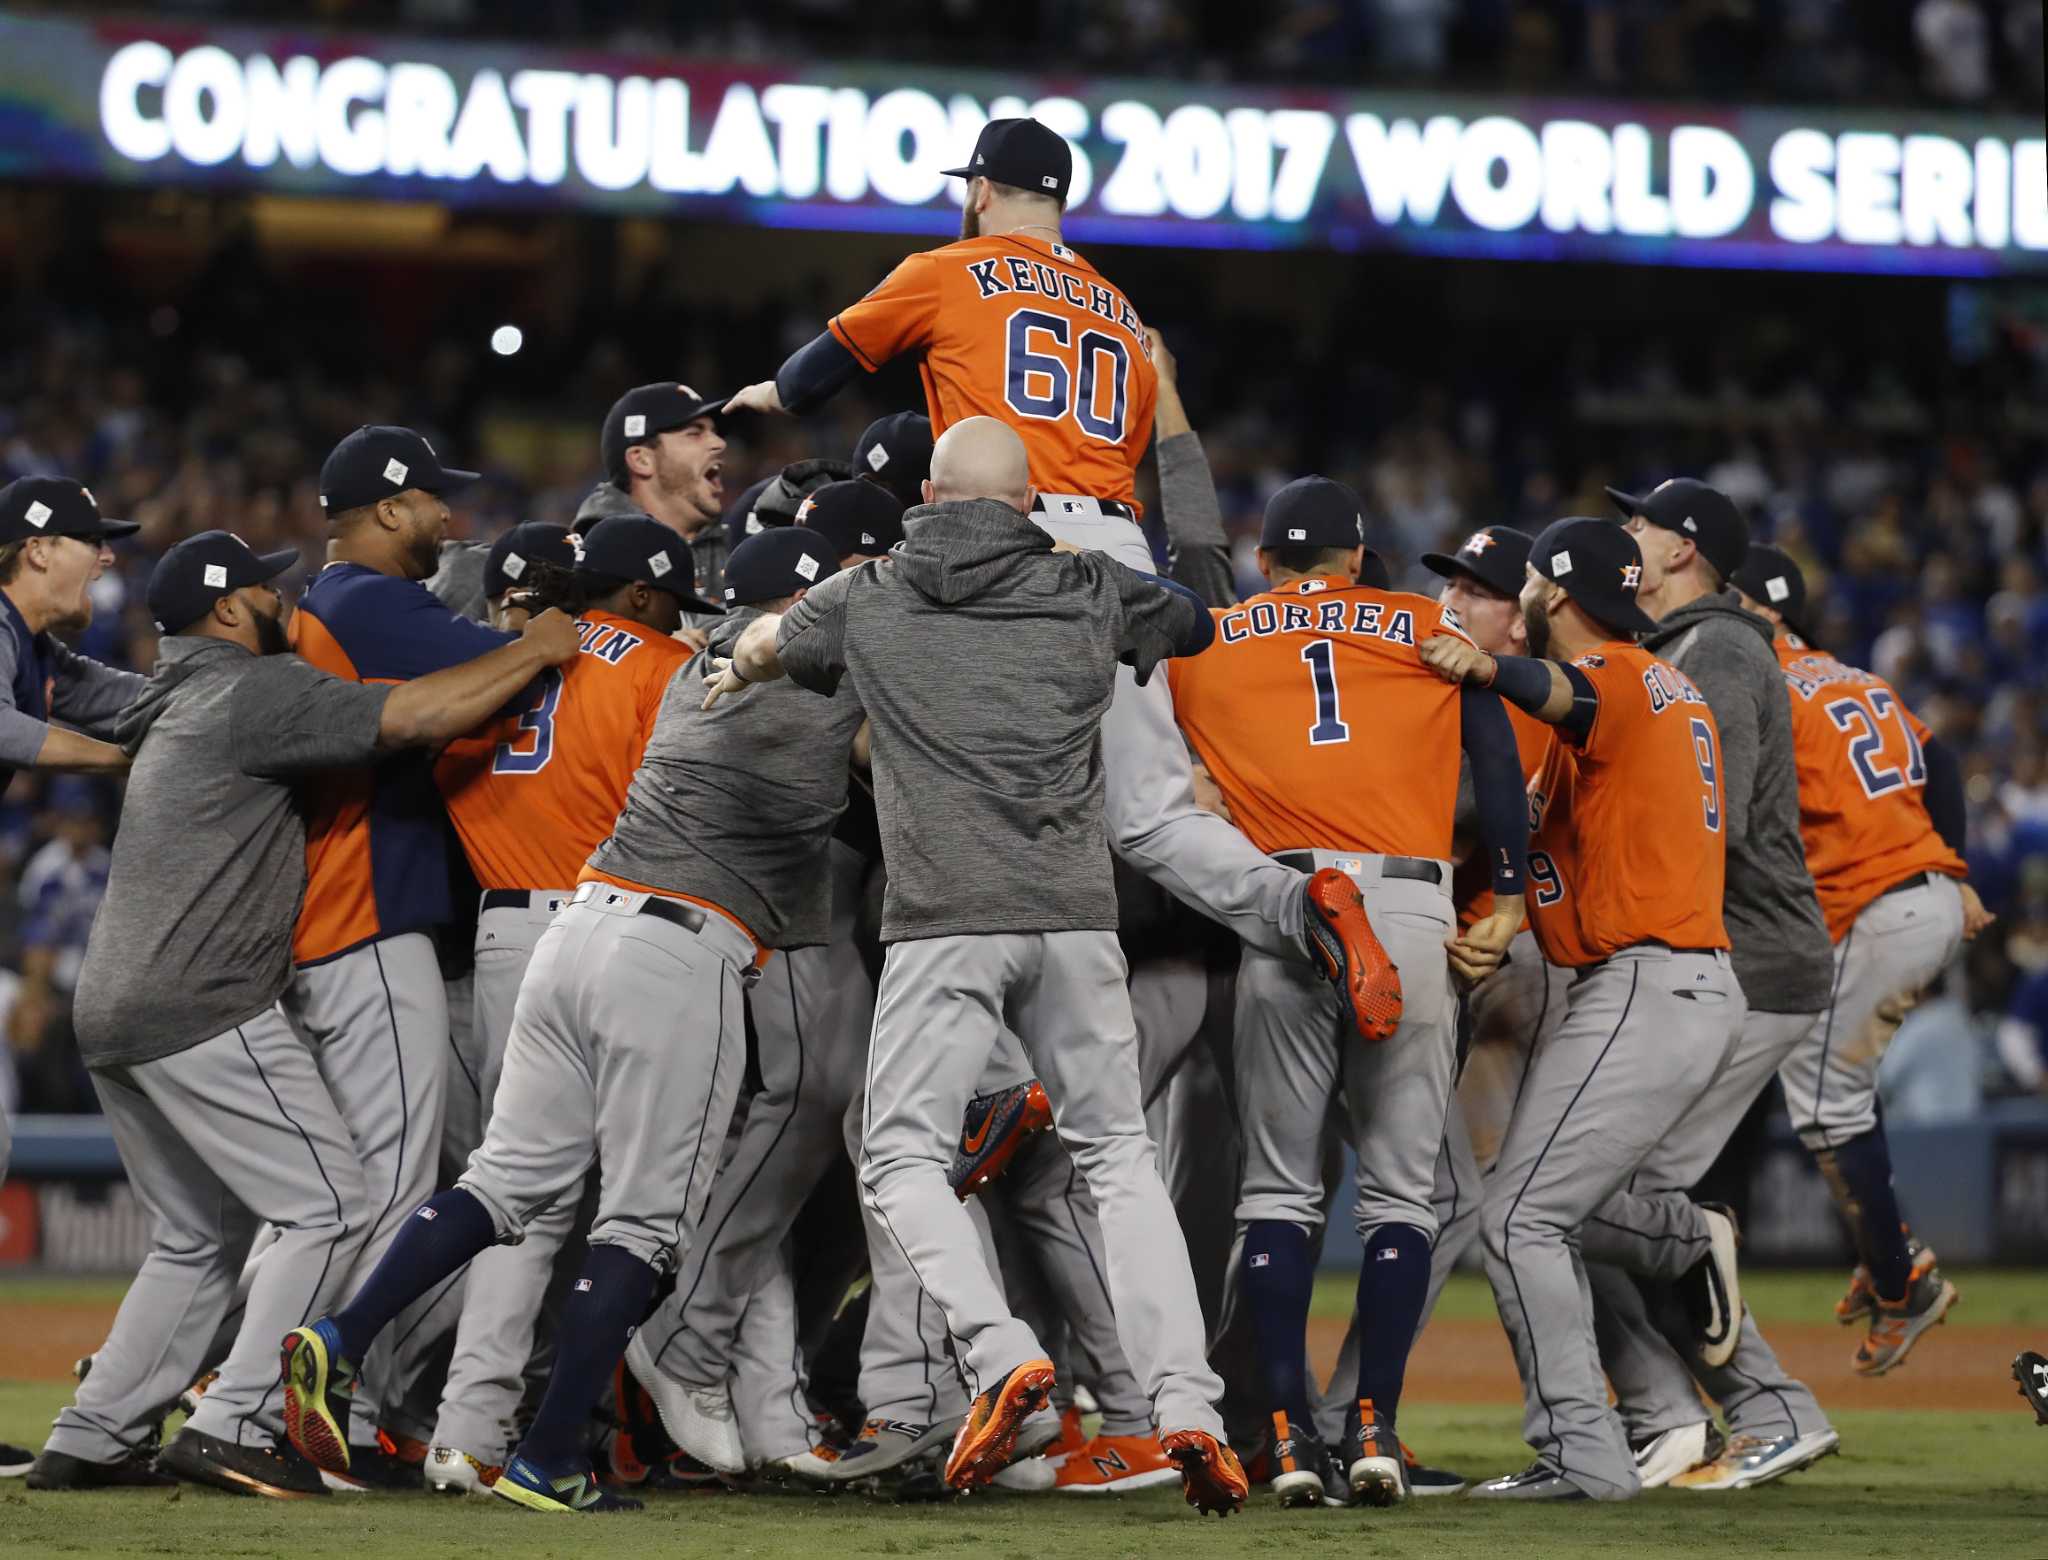 Should Houston Astros lose their 2017 World Series title over sign